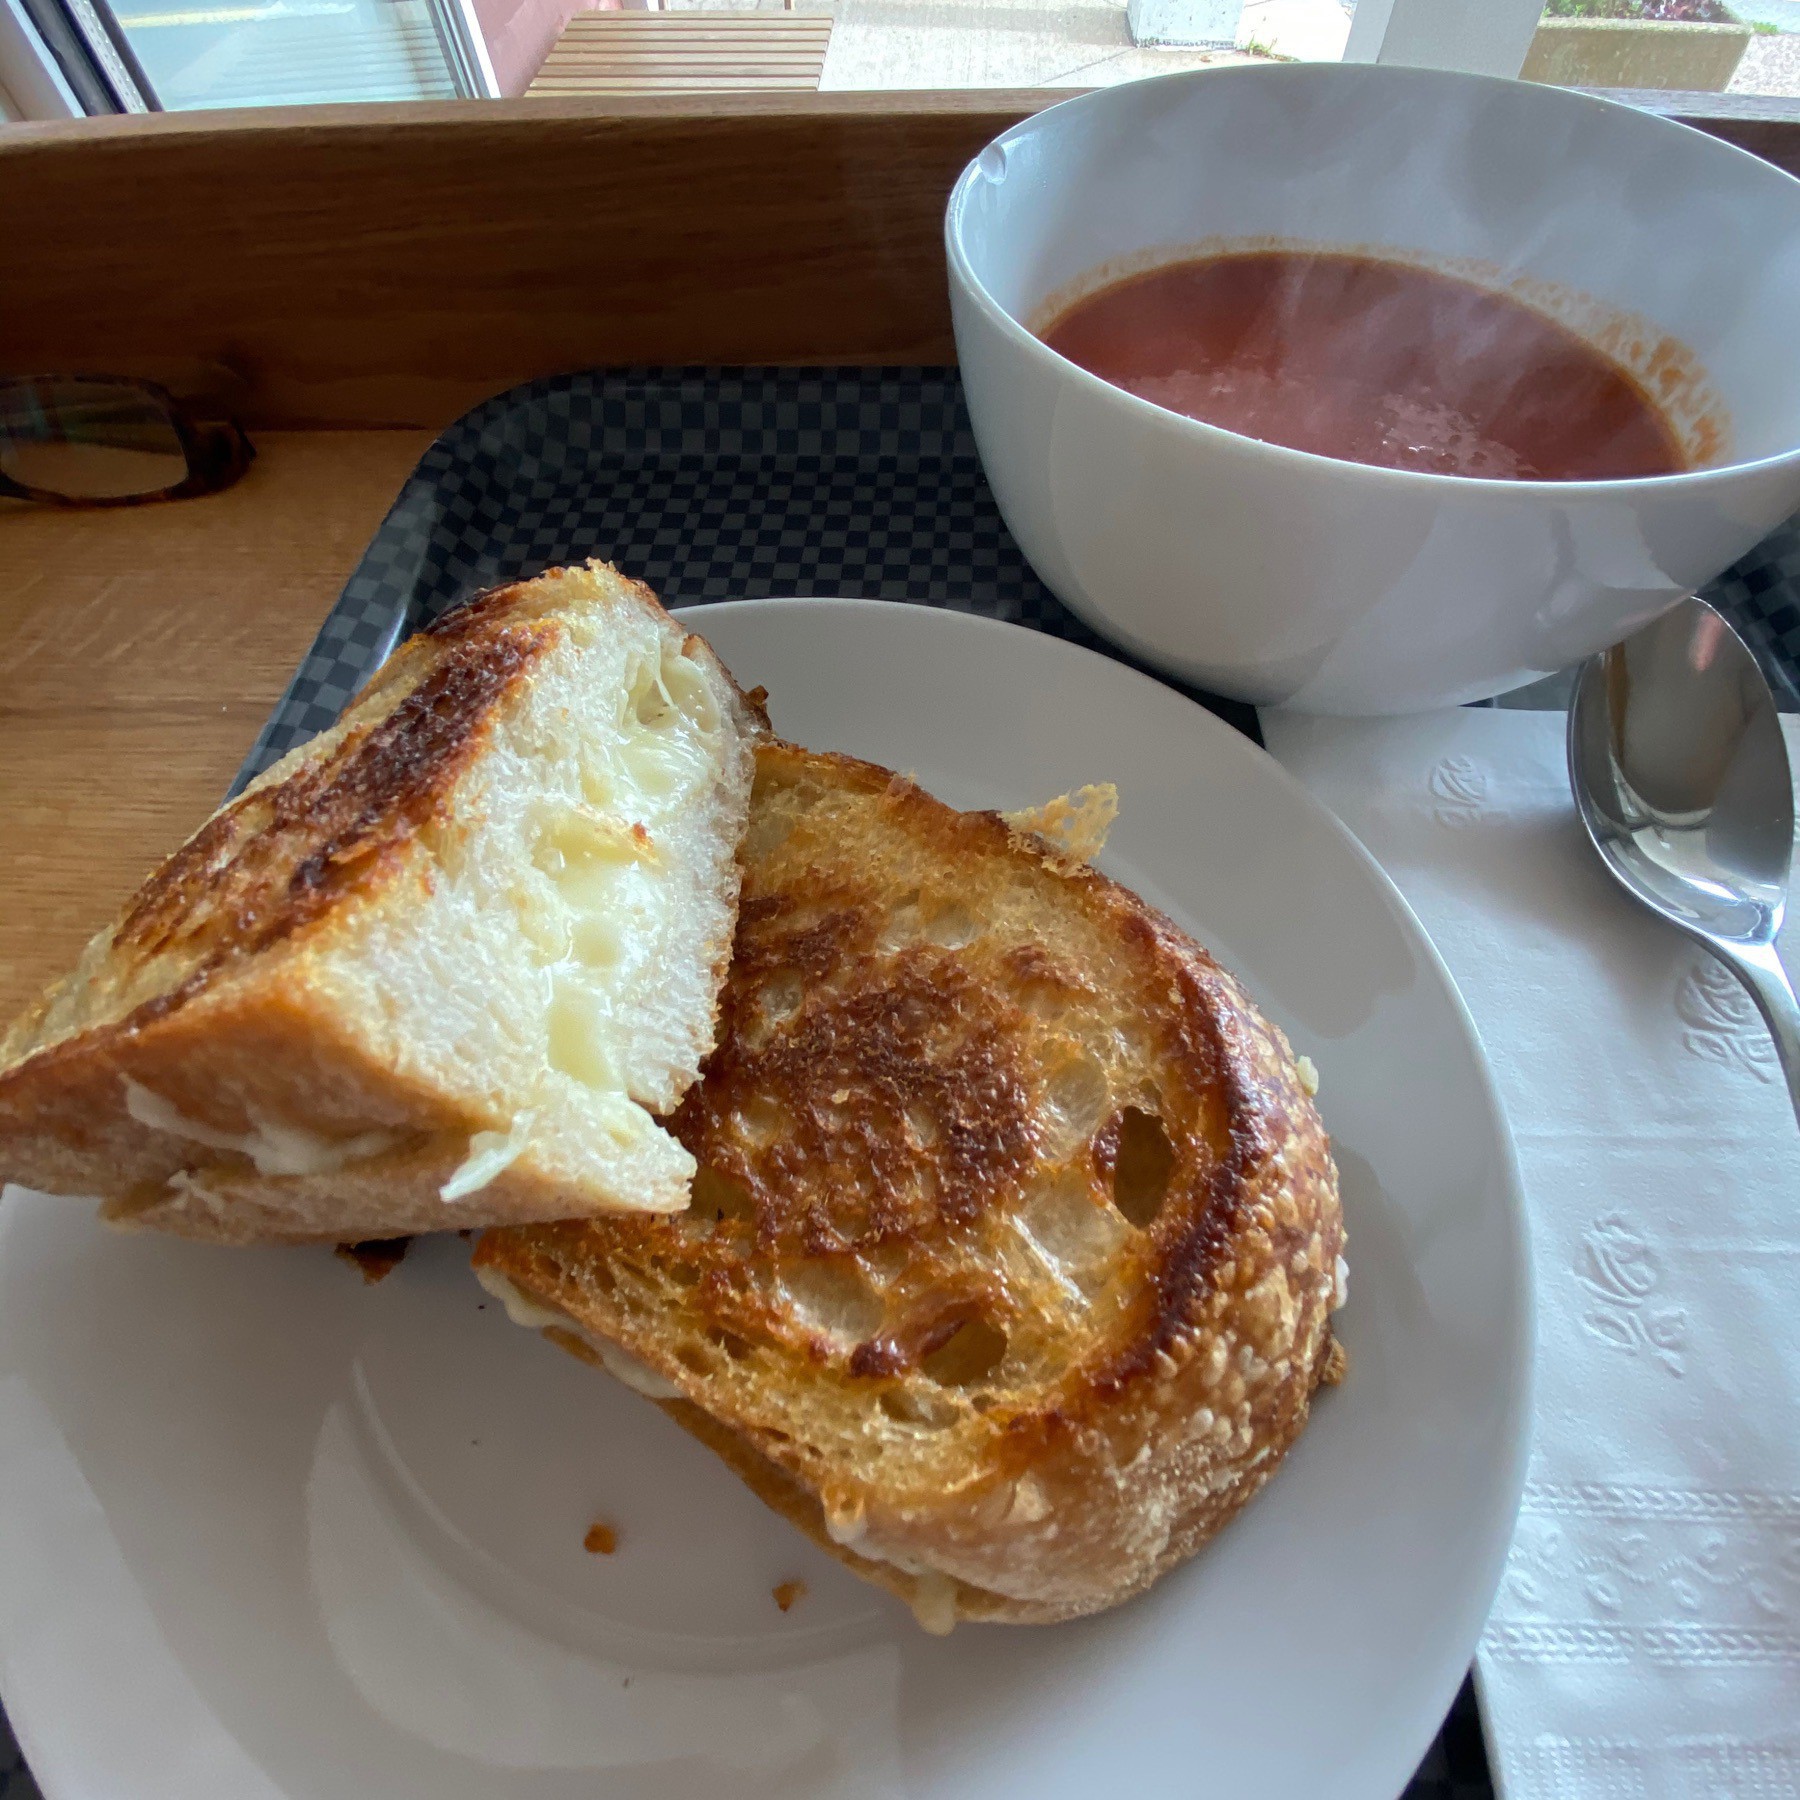 Grilled cheese sandwich on plate with bowl of tomato soup.